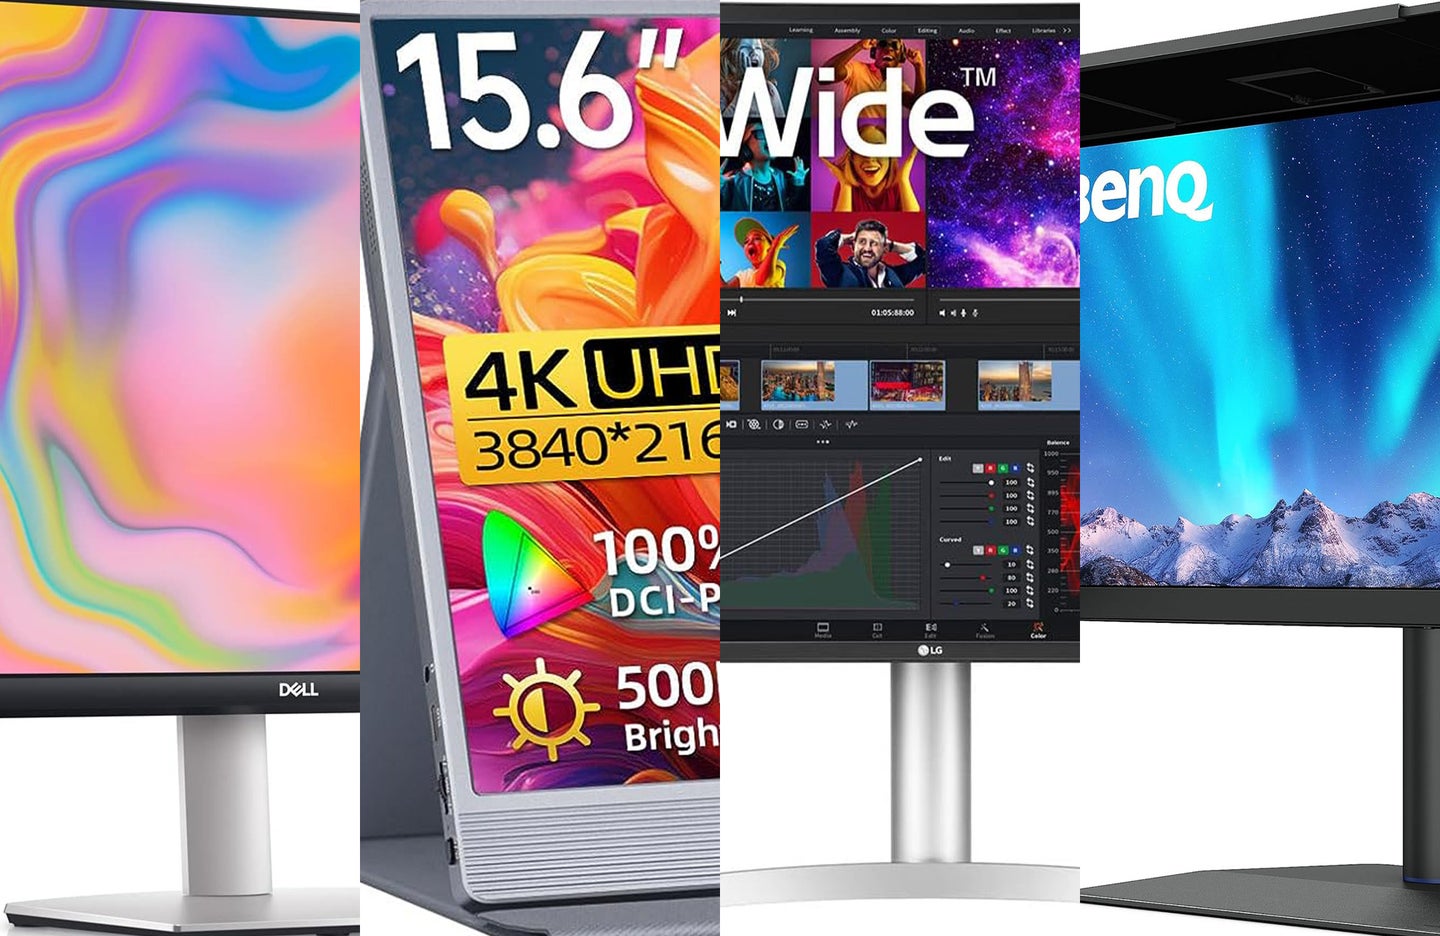 Four of the best monitors for video editing with colorful images on the screens are sliced together against a white background.